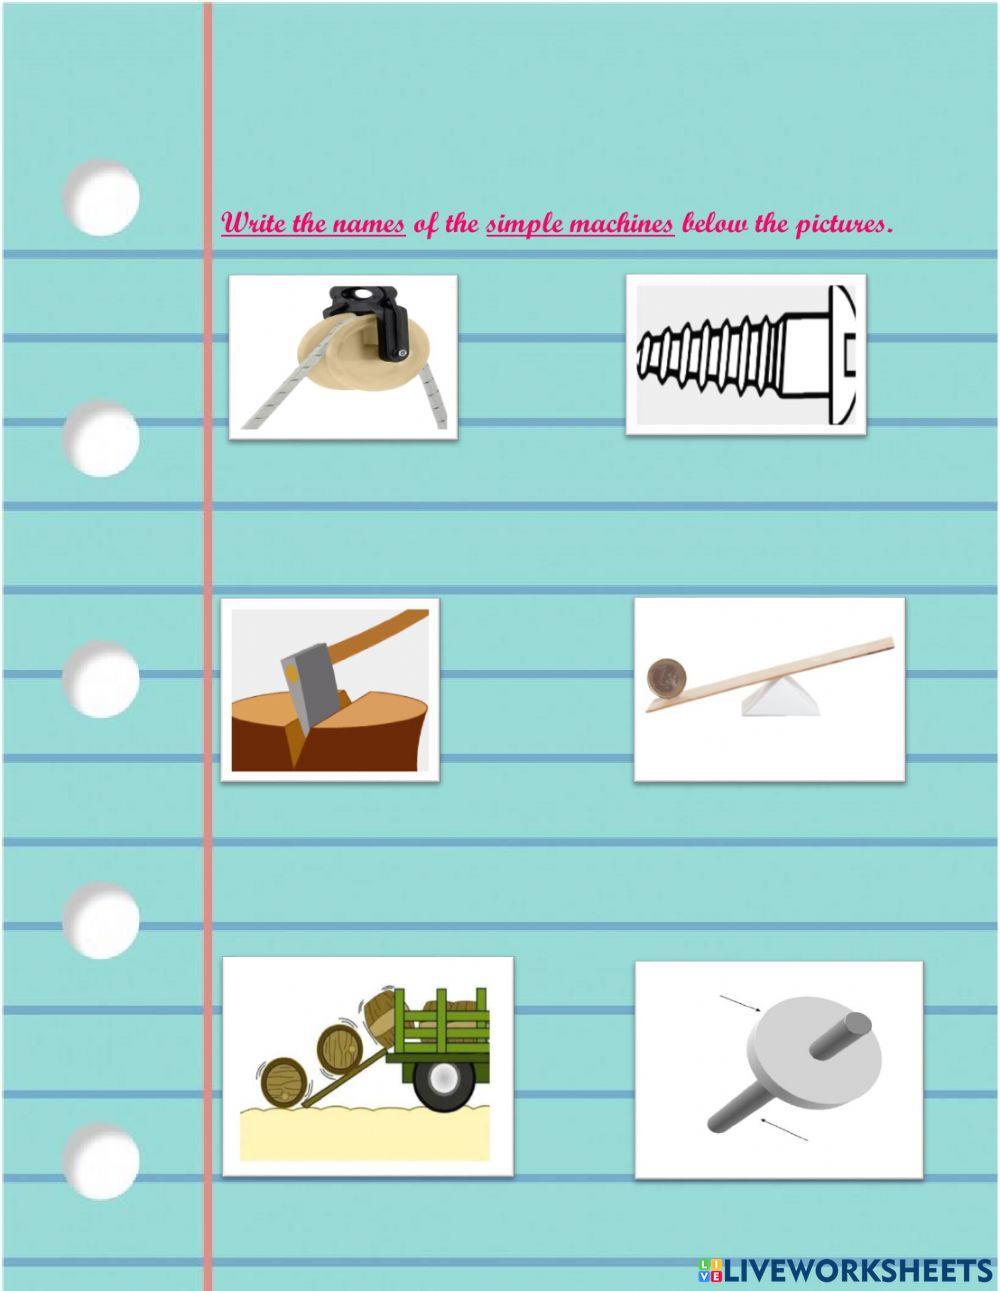 Simple Machine Definitions